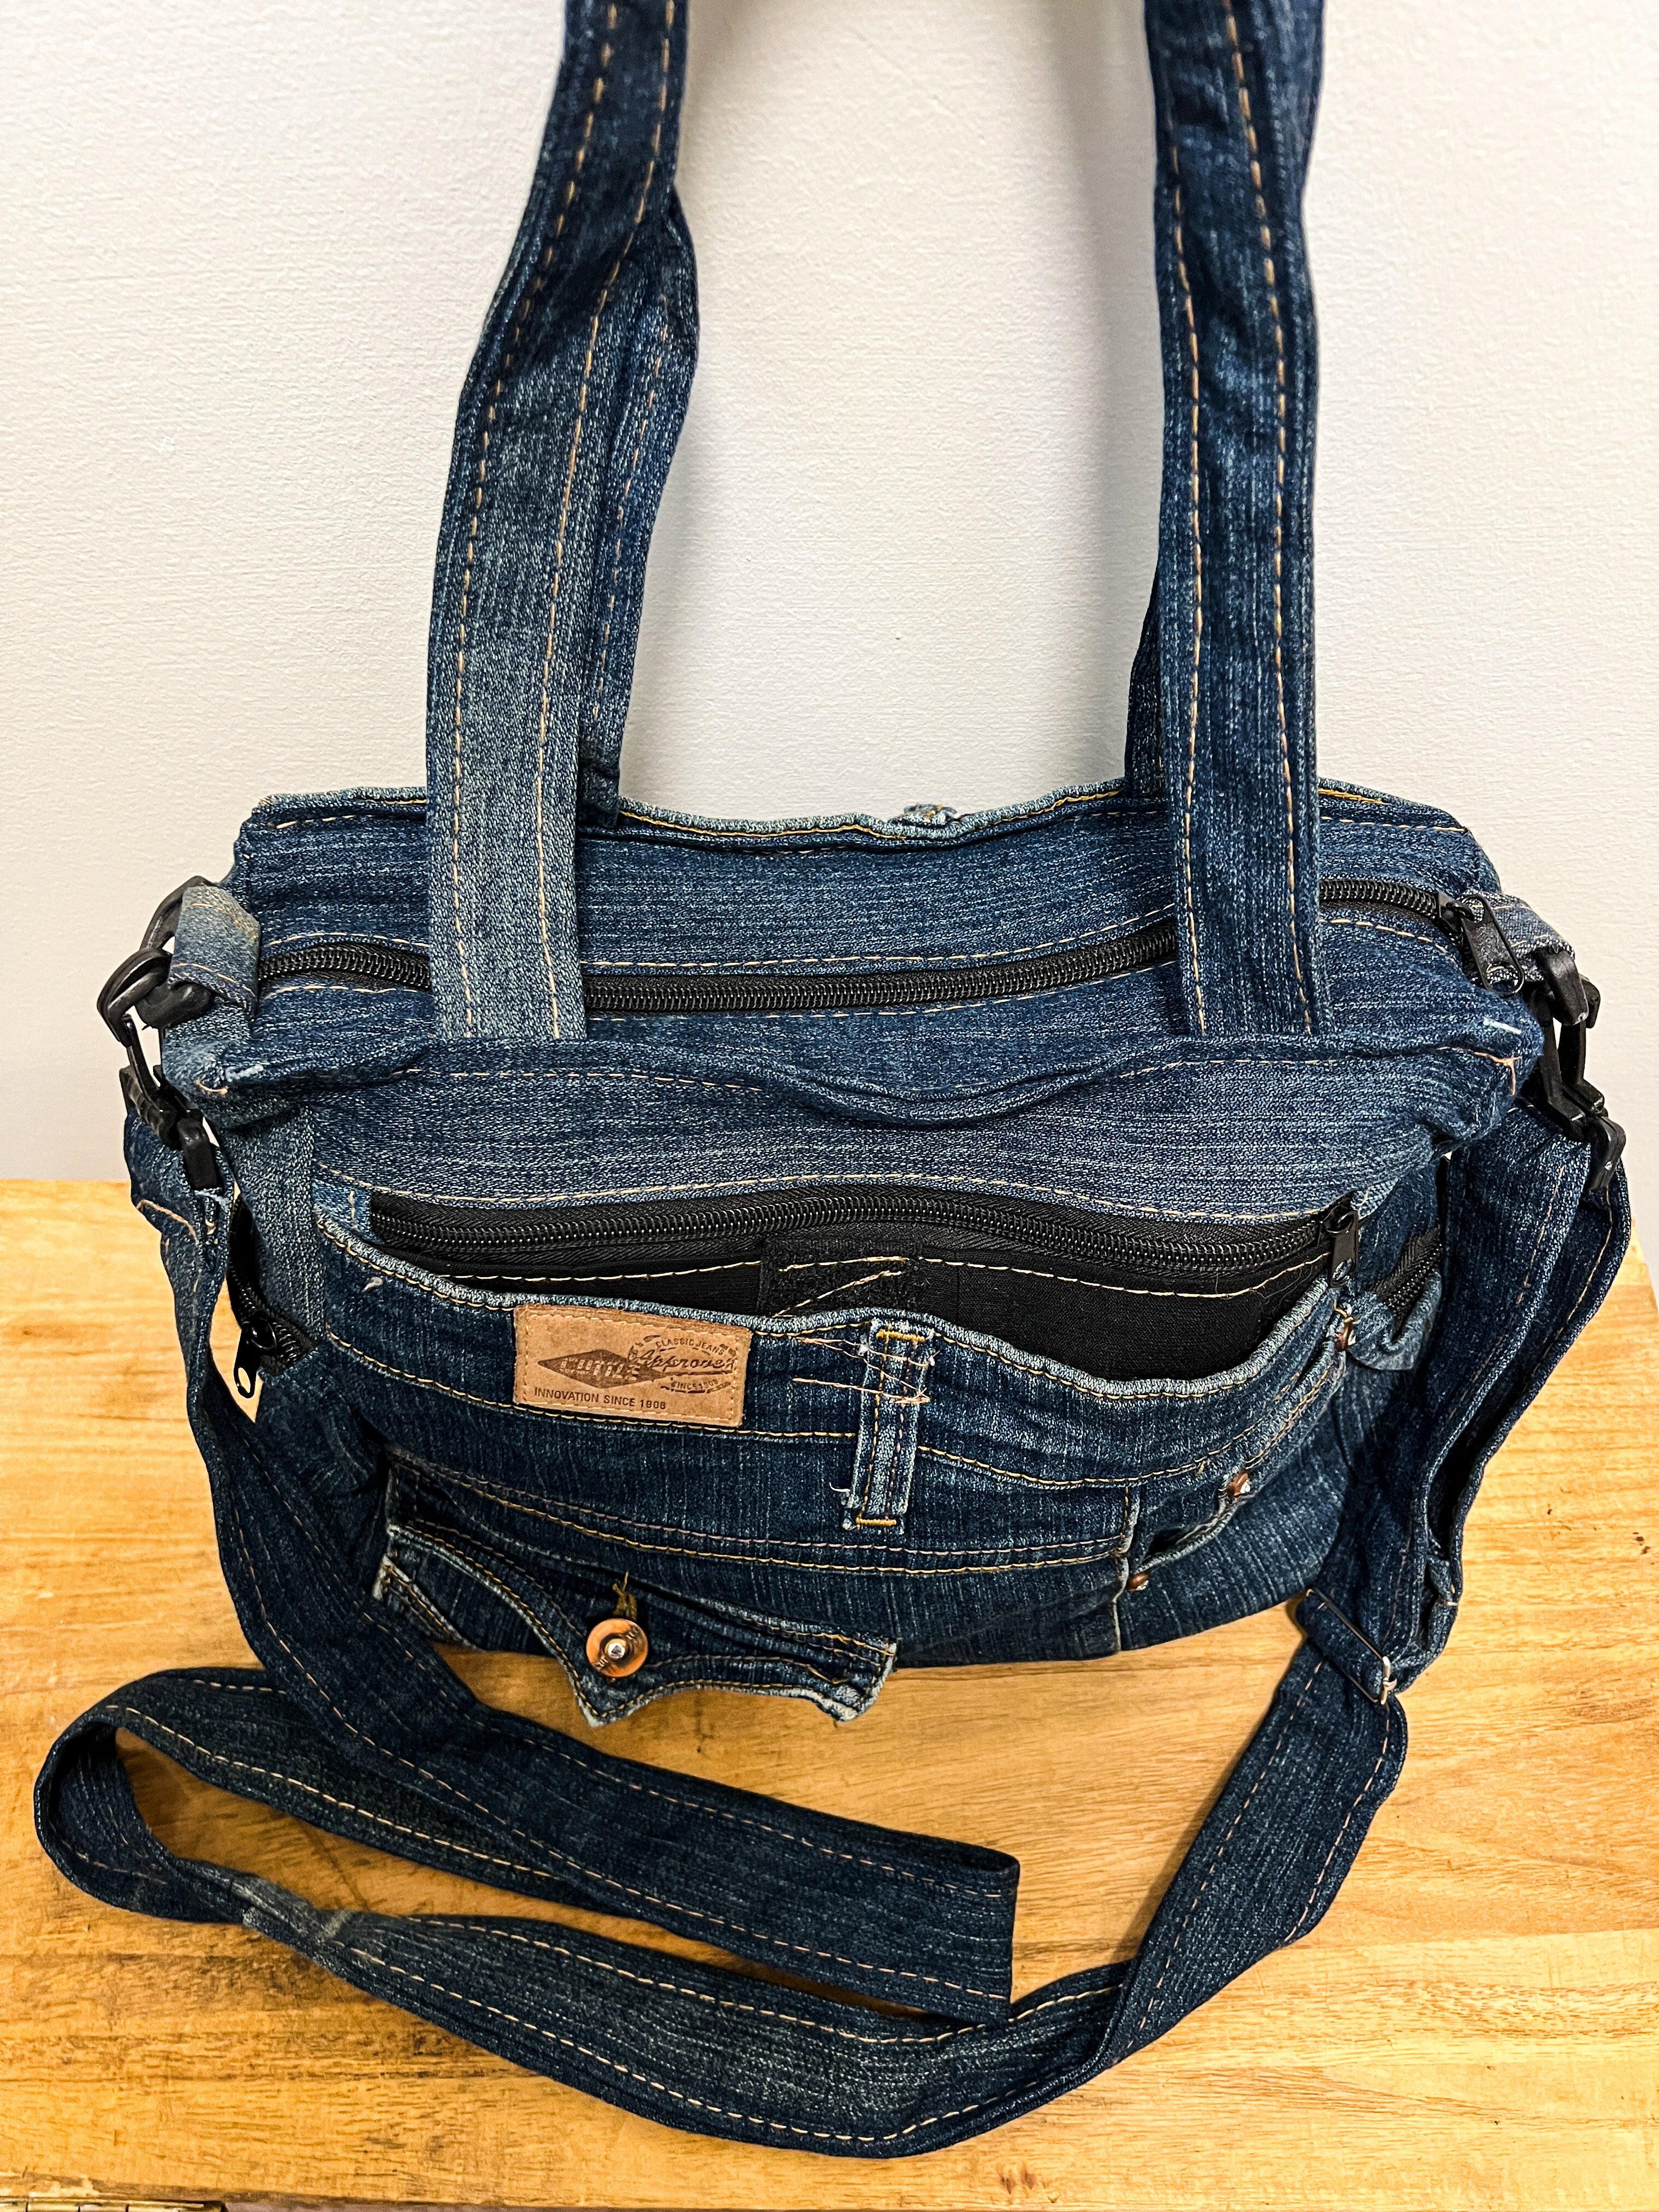 How To Make A Denim Mini Bag- Upcycle Project - YouTube